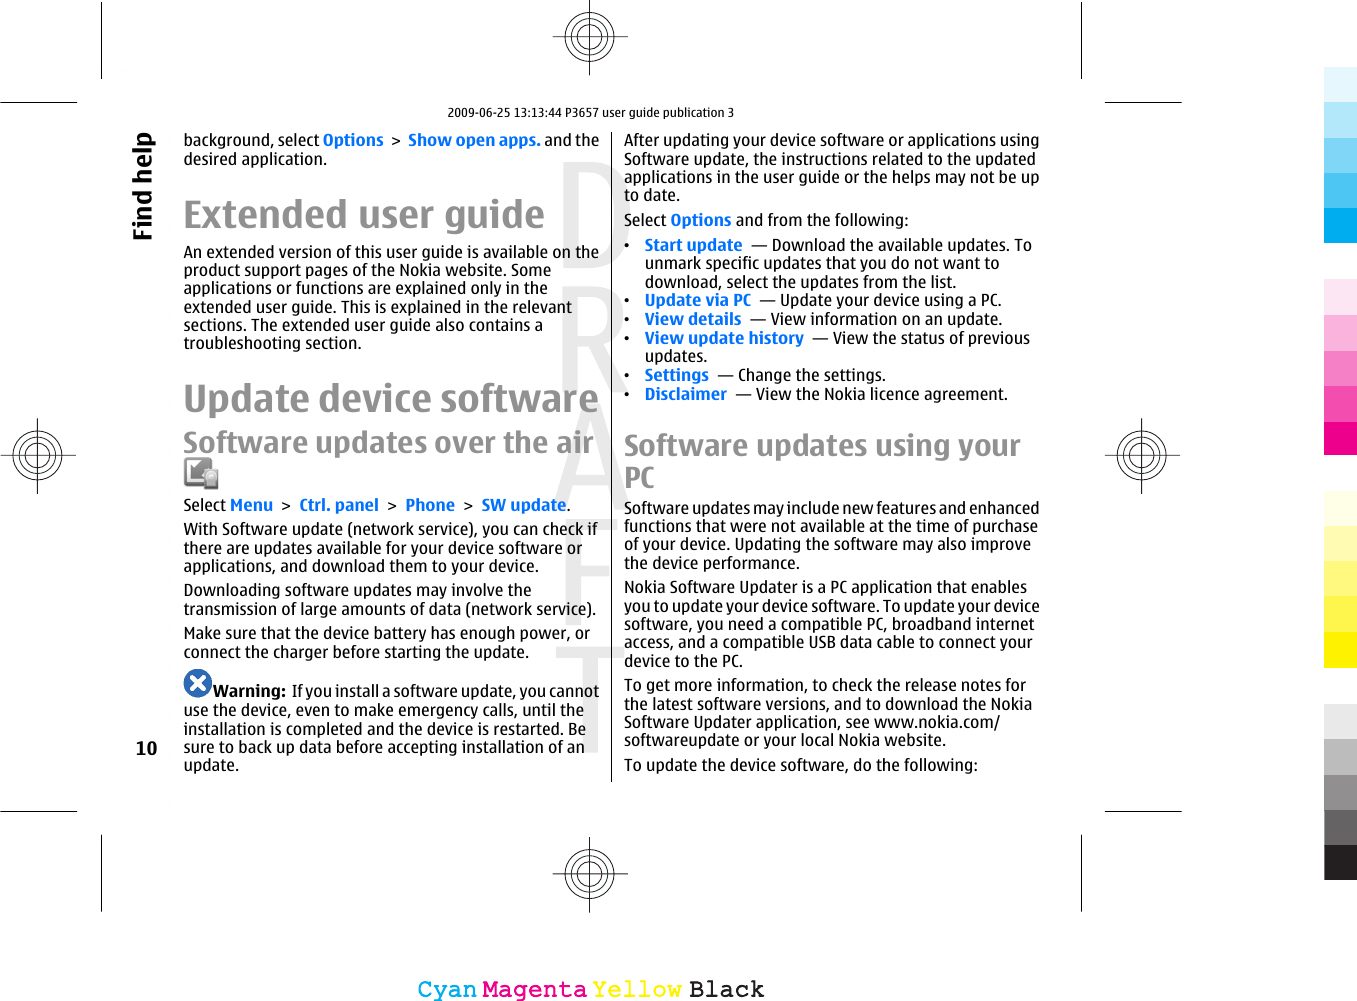 background, select Options &gt; Show open apps. and thedesired application.Extended user guideAn extended version of this user guide is available on theproduct support pages of the Nokia website. Someapplications or functions are explained only in theextended user guide. This is explained in the relevantsections. The extended user guide also contains atroubleshooting section.Update device softwareSoftware updates over the airSelect Menu &gt; Ctrl. panel &gt; Phone &gt; SW update.With Software update (network service), you can check ifthere are updates available for your device software orapplications, and download them to your device.Downloading software updates may involve thetransmission of large amounts of data (network service).Make sure that the device battery has enough power, orconnect the charger before starting the update.Warning:  If you install a software update, you cannotuse the device, even to make emergency calls, until theinstallation is completed and the device is restarted. Besure to back up data before accepting installation of anupdate.After updating your device software or applications usingSoftware update, the instructions related to the updatedapplications in the user guide or the helps may not be upto date.Select Options and from the following:•Start update  — Download the available updates. Tounmark specific updates that you do not want todownload, select the updates from the list.•Update via PC  — Update your device using a PC.•View details  — View information on an update.•View update history  — View the status of previousupdates.•Settings  — Change the settings.•Disclaimer  — View the Nokia licence agreement.Software updates using yourPCSoftware updates may include new features and enhancedfunctions that were not available at the time of purchaseof your device. Updating the software may also improvethe device performance.Nokia Software Updater is a PC application that enablesyou to update your device software. To update your devicesoftware, you need a compatible PC, broadband internetaccess, and a compatible USB data cable to connect yourdevice to the PC.To get more information, to check the release notes forthe latest software versions, and to download the NokiaSoftware Updater application, see www.nokia.com/softwareupdate or your local Nokia website.To update the device software, do the following:10Find helpCyanCyanMagentaMagentaYellowYellowBlackBlack2009-06-25 13:13:44 P3657 user guide publication 3